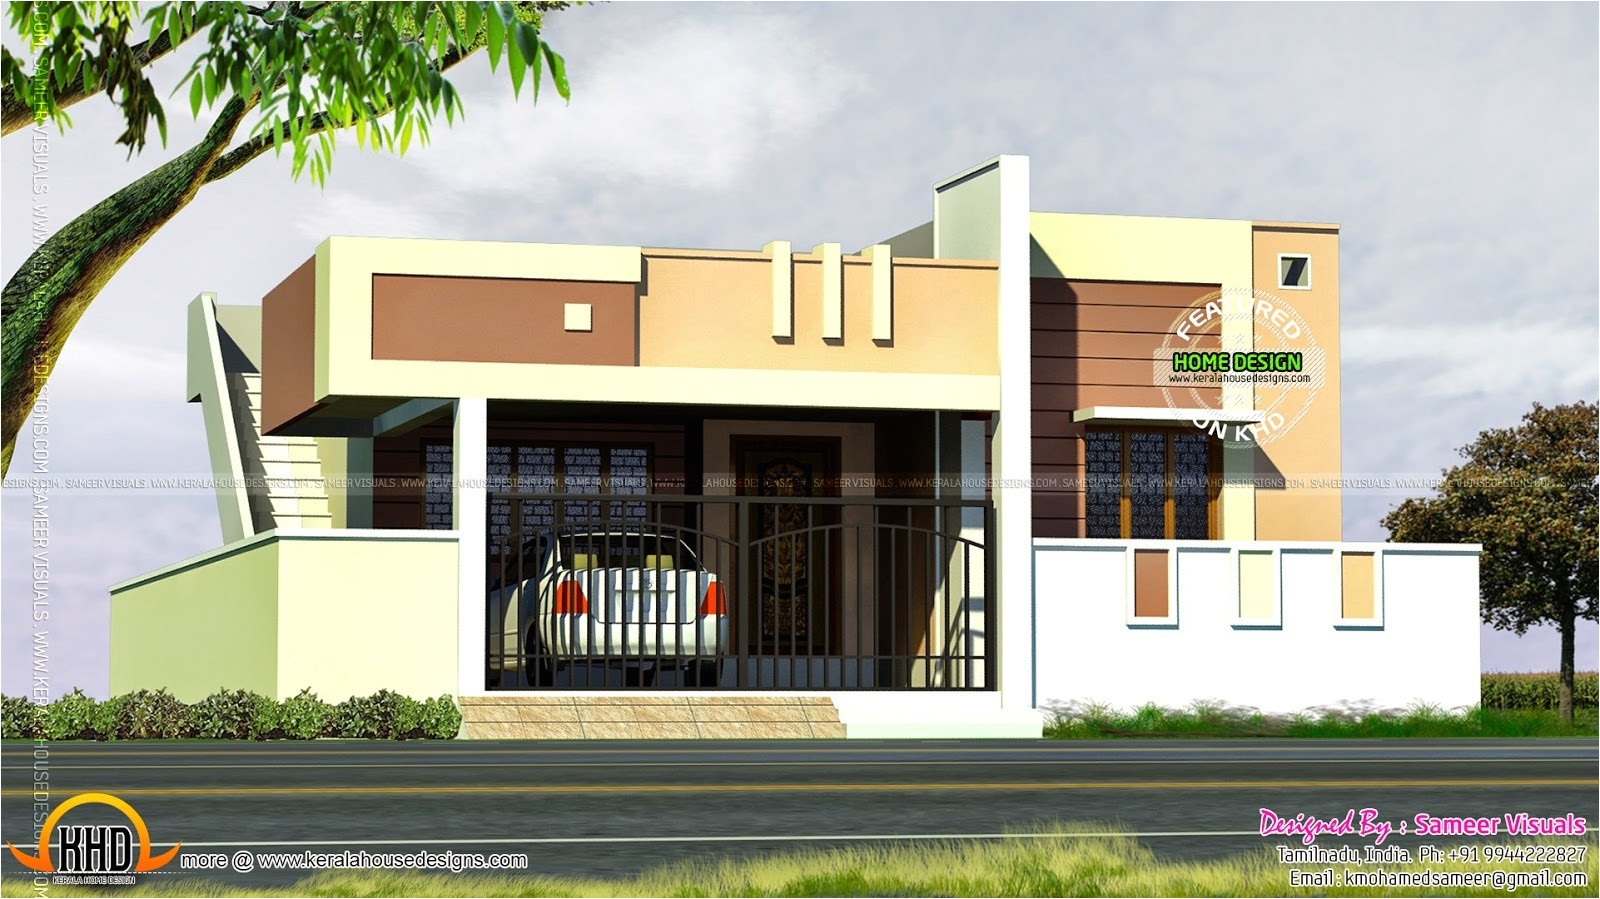 Amazing tamil nadu home plans | plougonver for classy house plan tamil